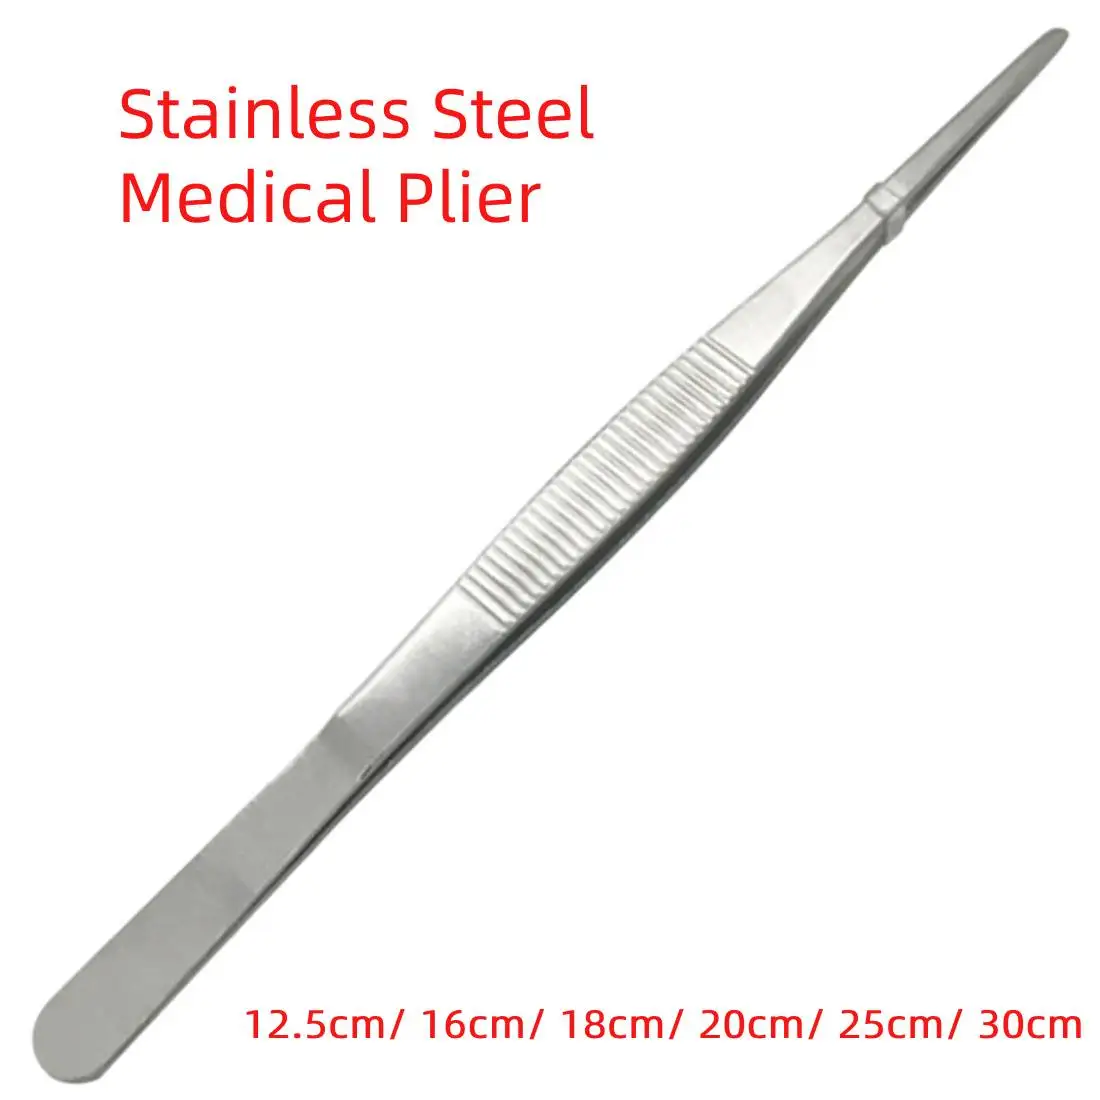 

Stainless Steel 12.5cm-30cm Toothed Tweezers Barbecue Long Food Tongs Straight Home Medical Tweezers Garden Kitchen BBQ Tool